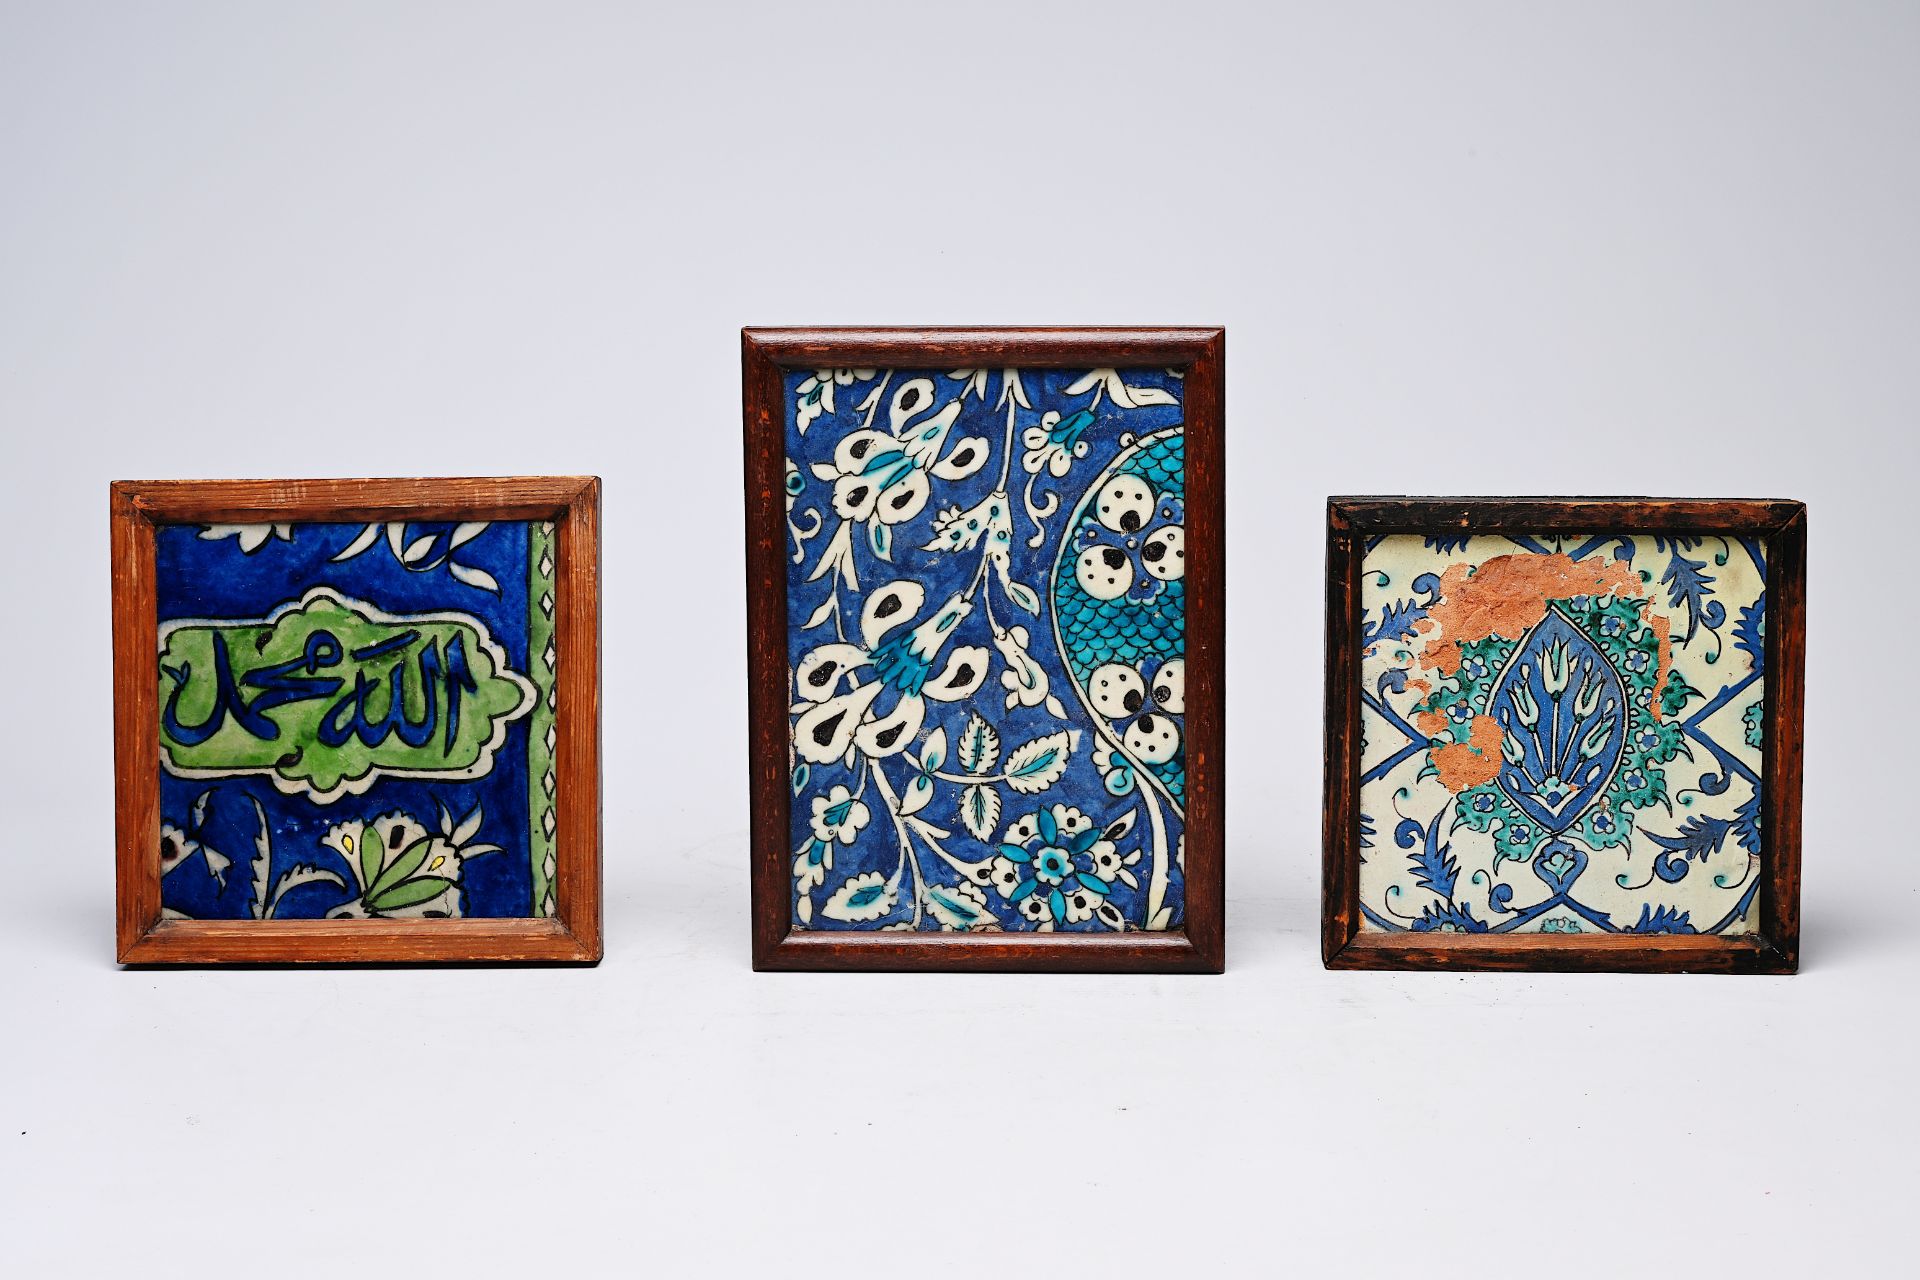 Three polychrome pottery tiles, Syria and North-Africa, 18th/19th C.